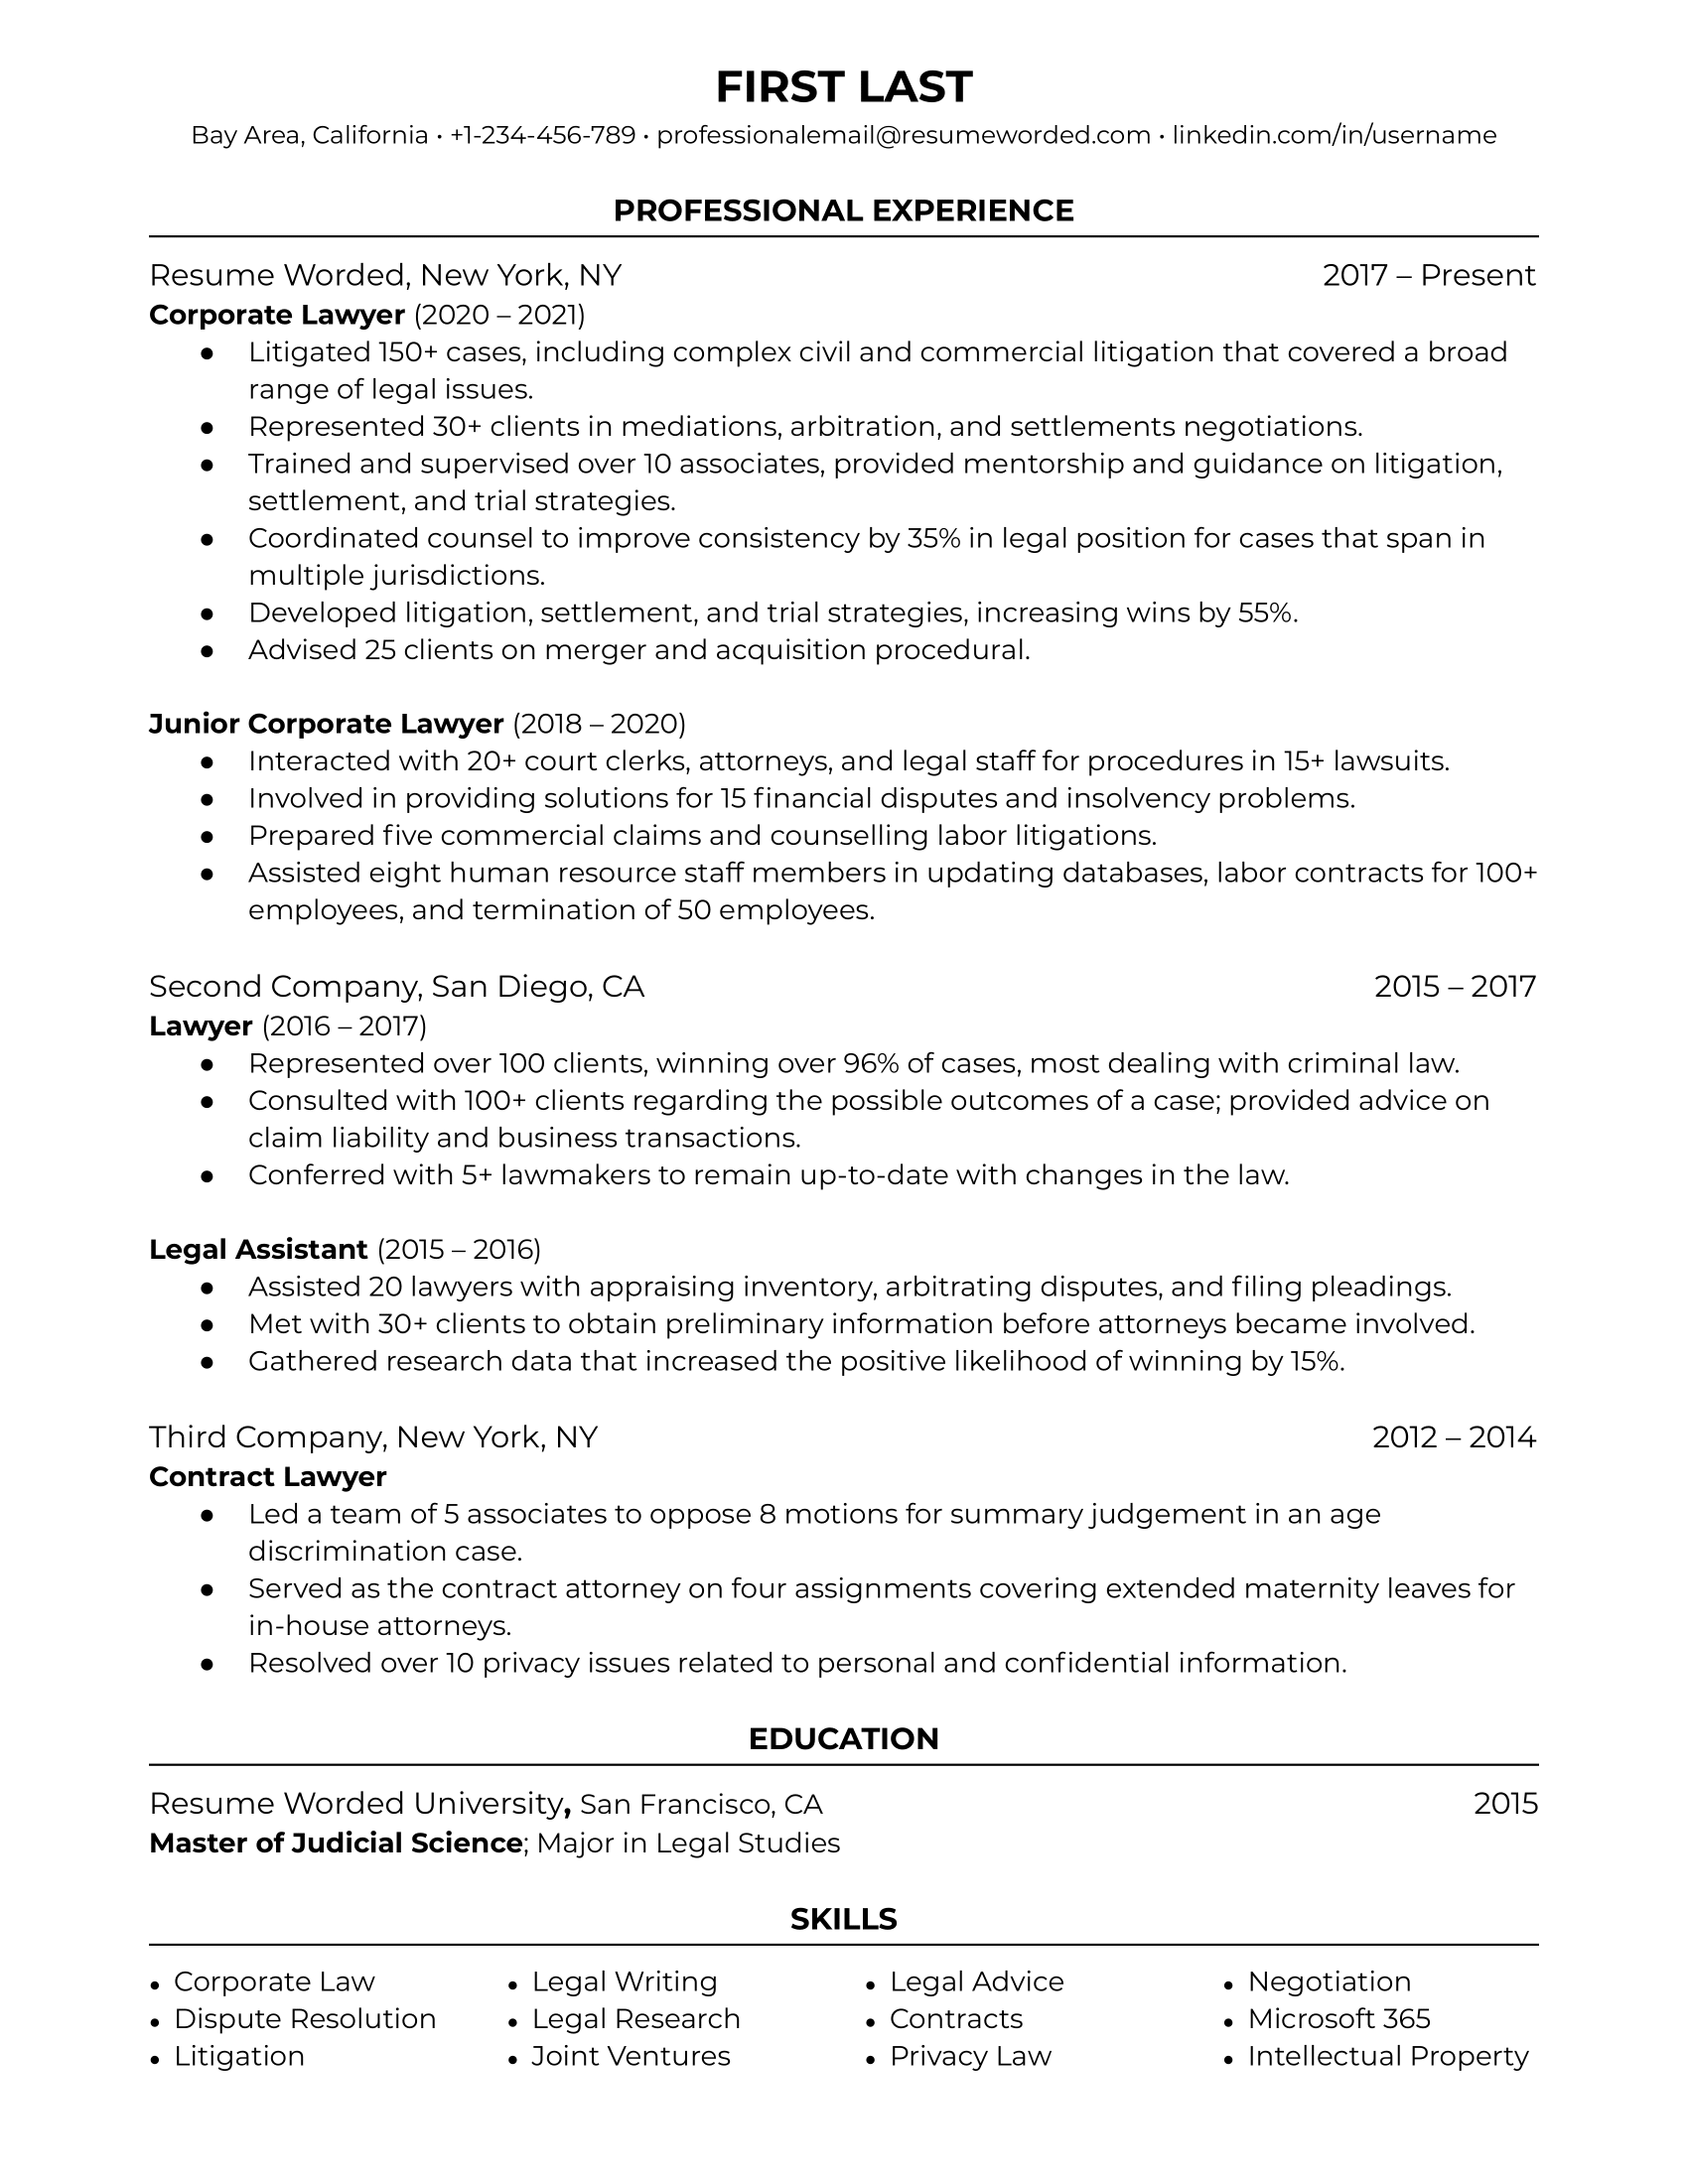 Corporate Lawyer Resume Template + Example